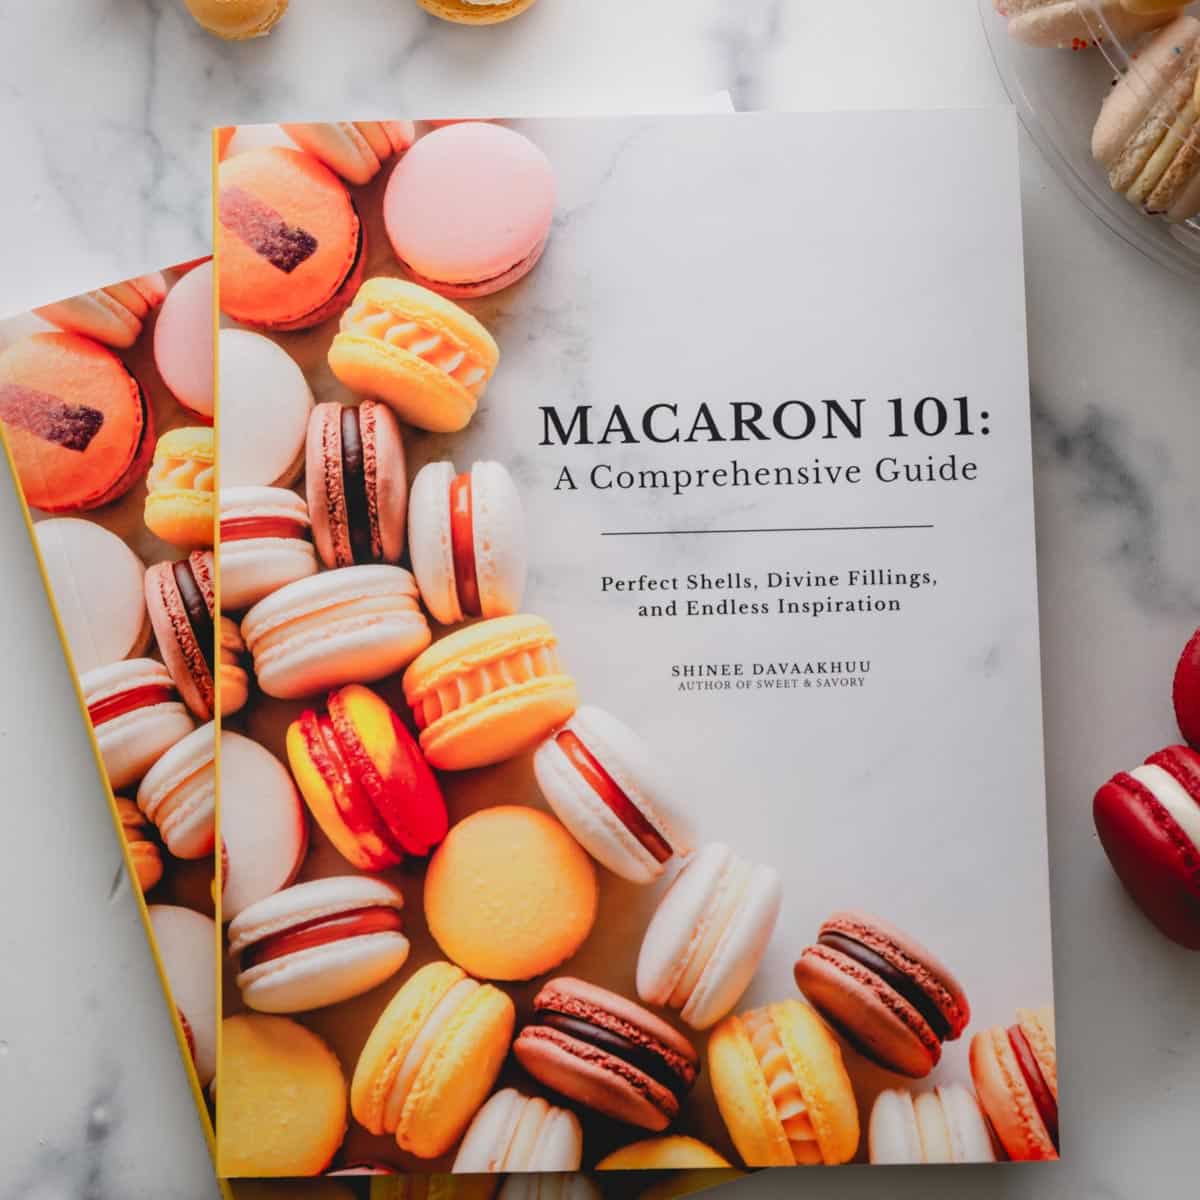 "Macaron 101" cookbook on a marble background.